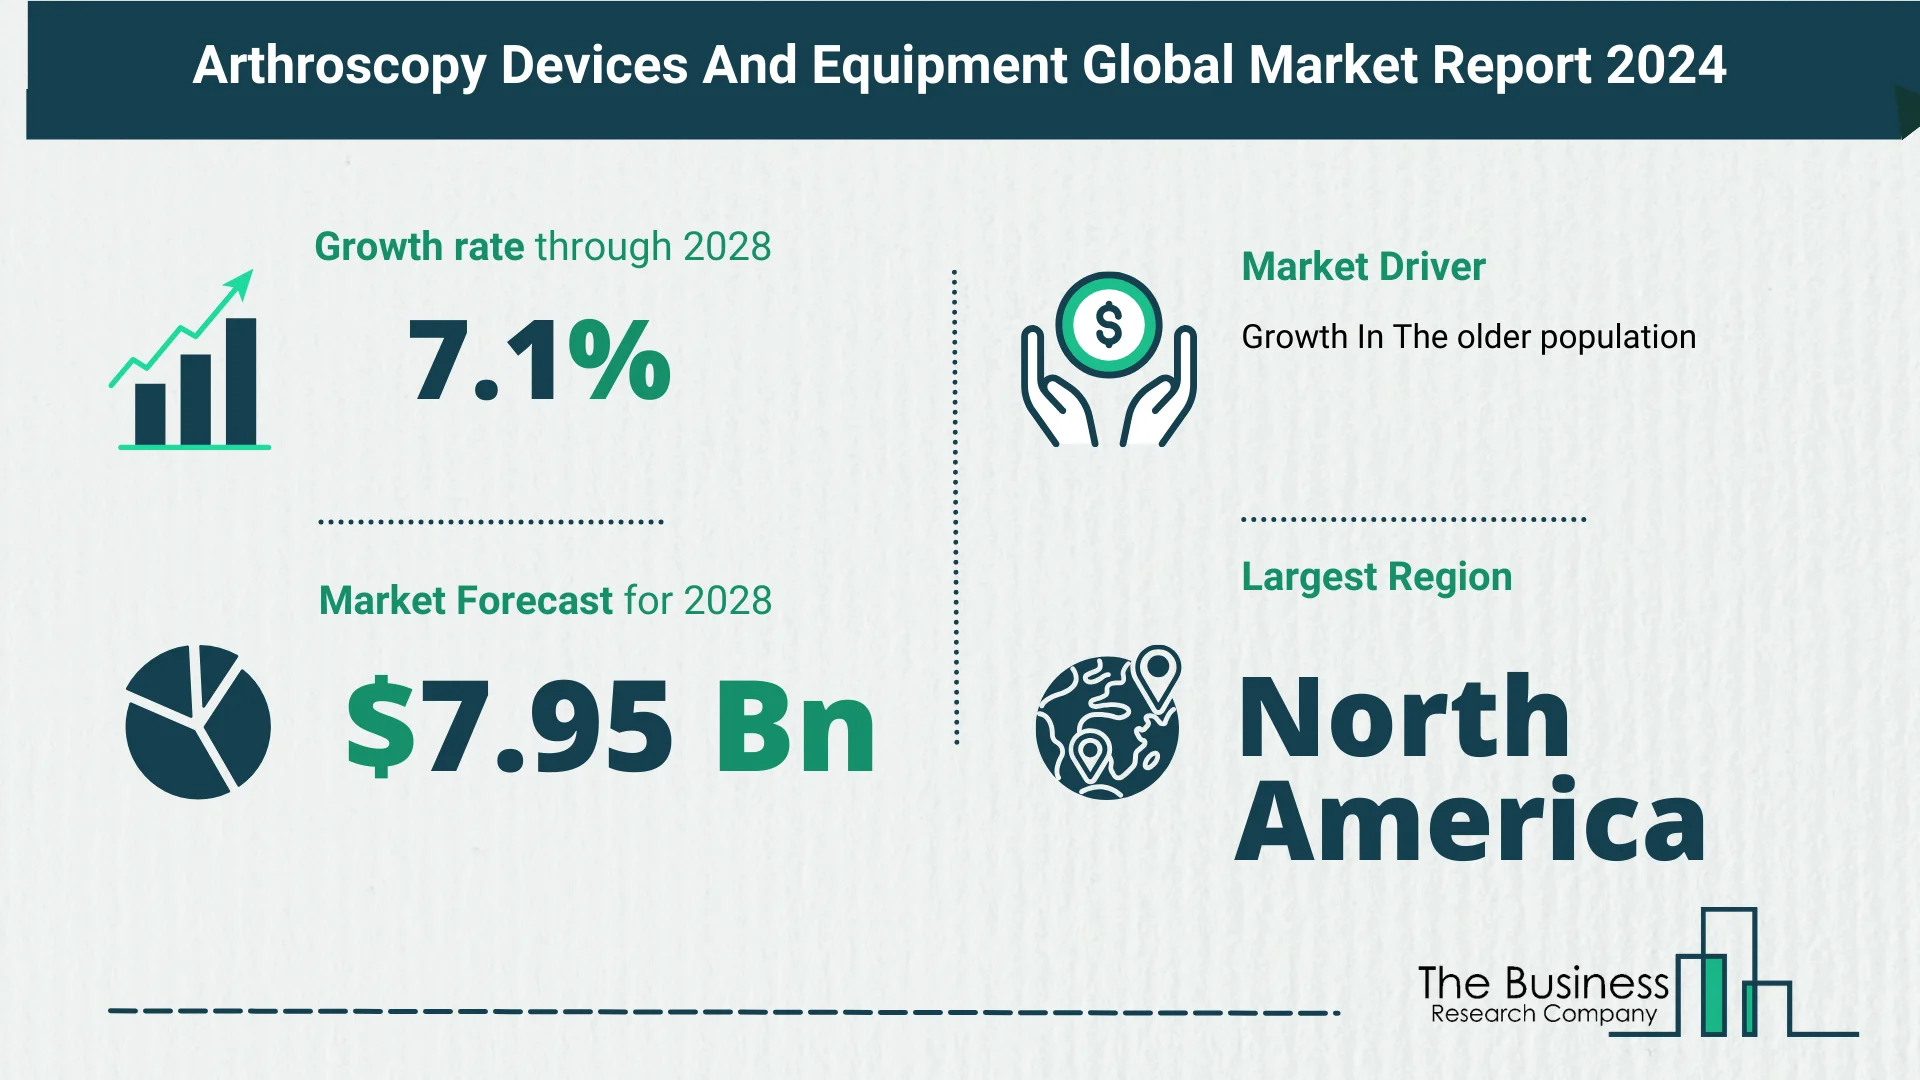 Global Arthroscopy Devices And Equipment Market Size